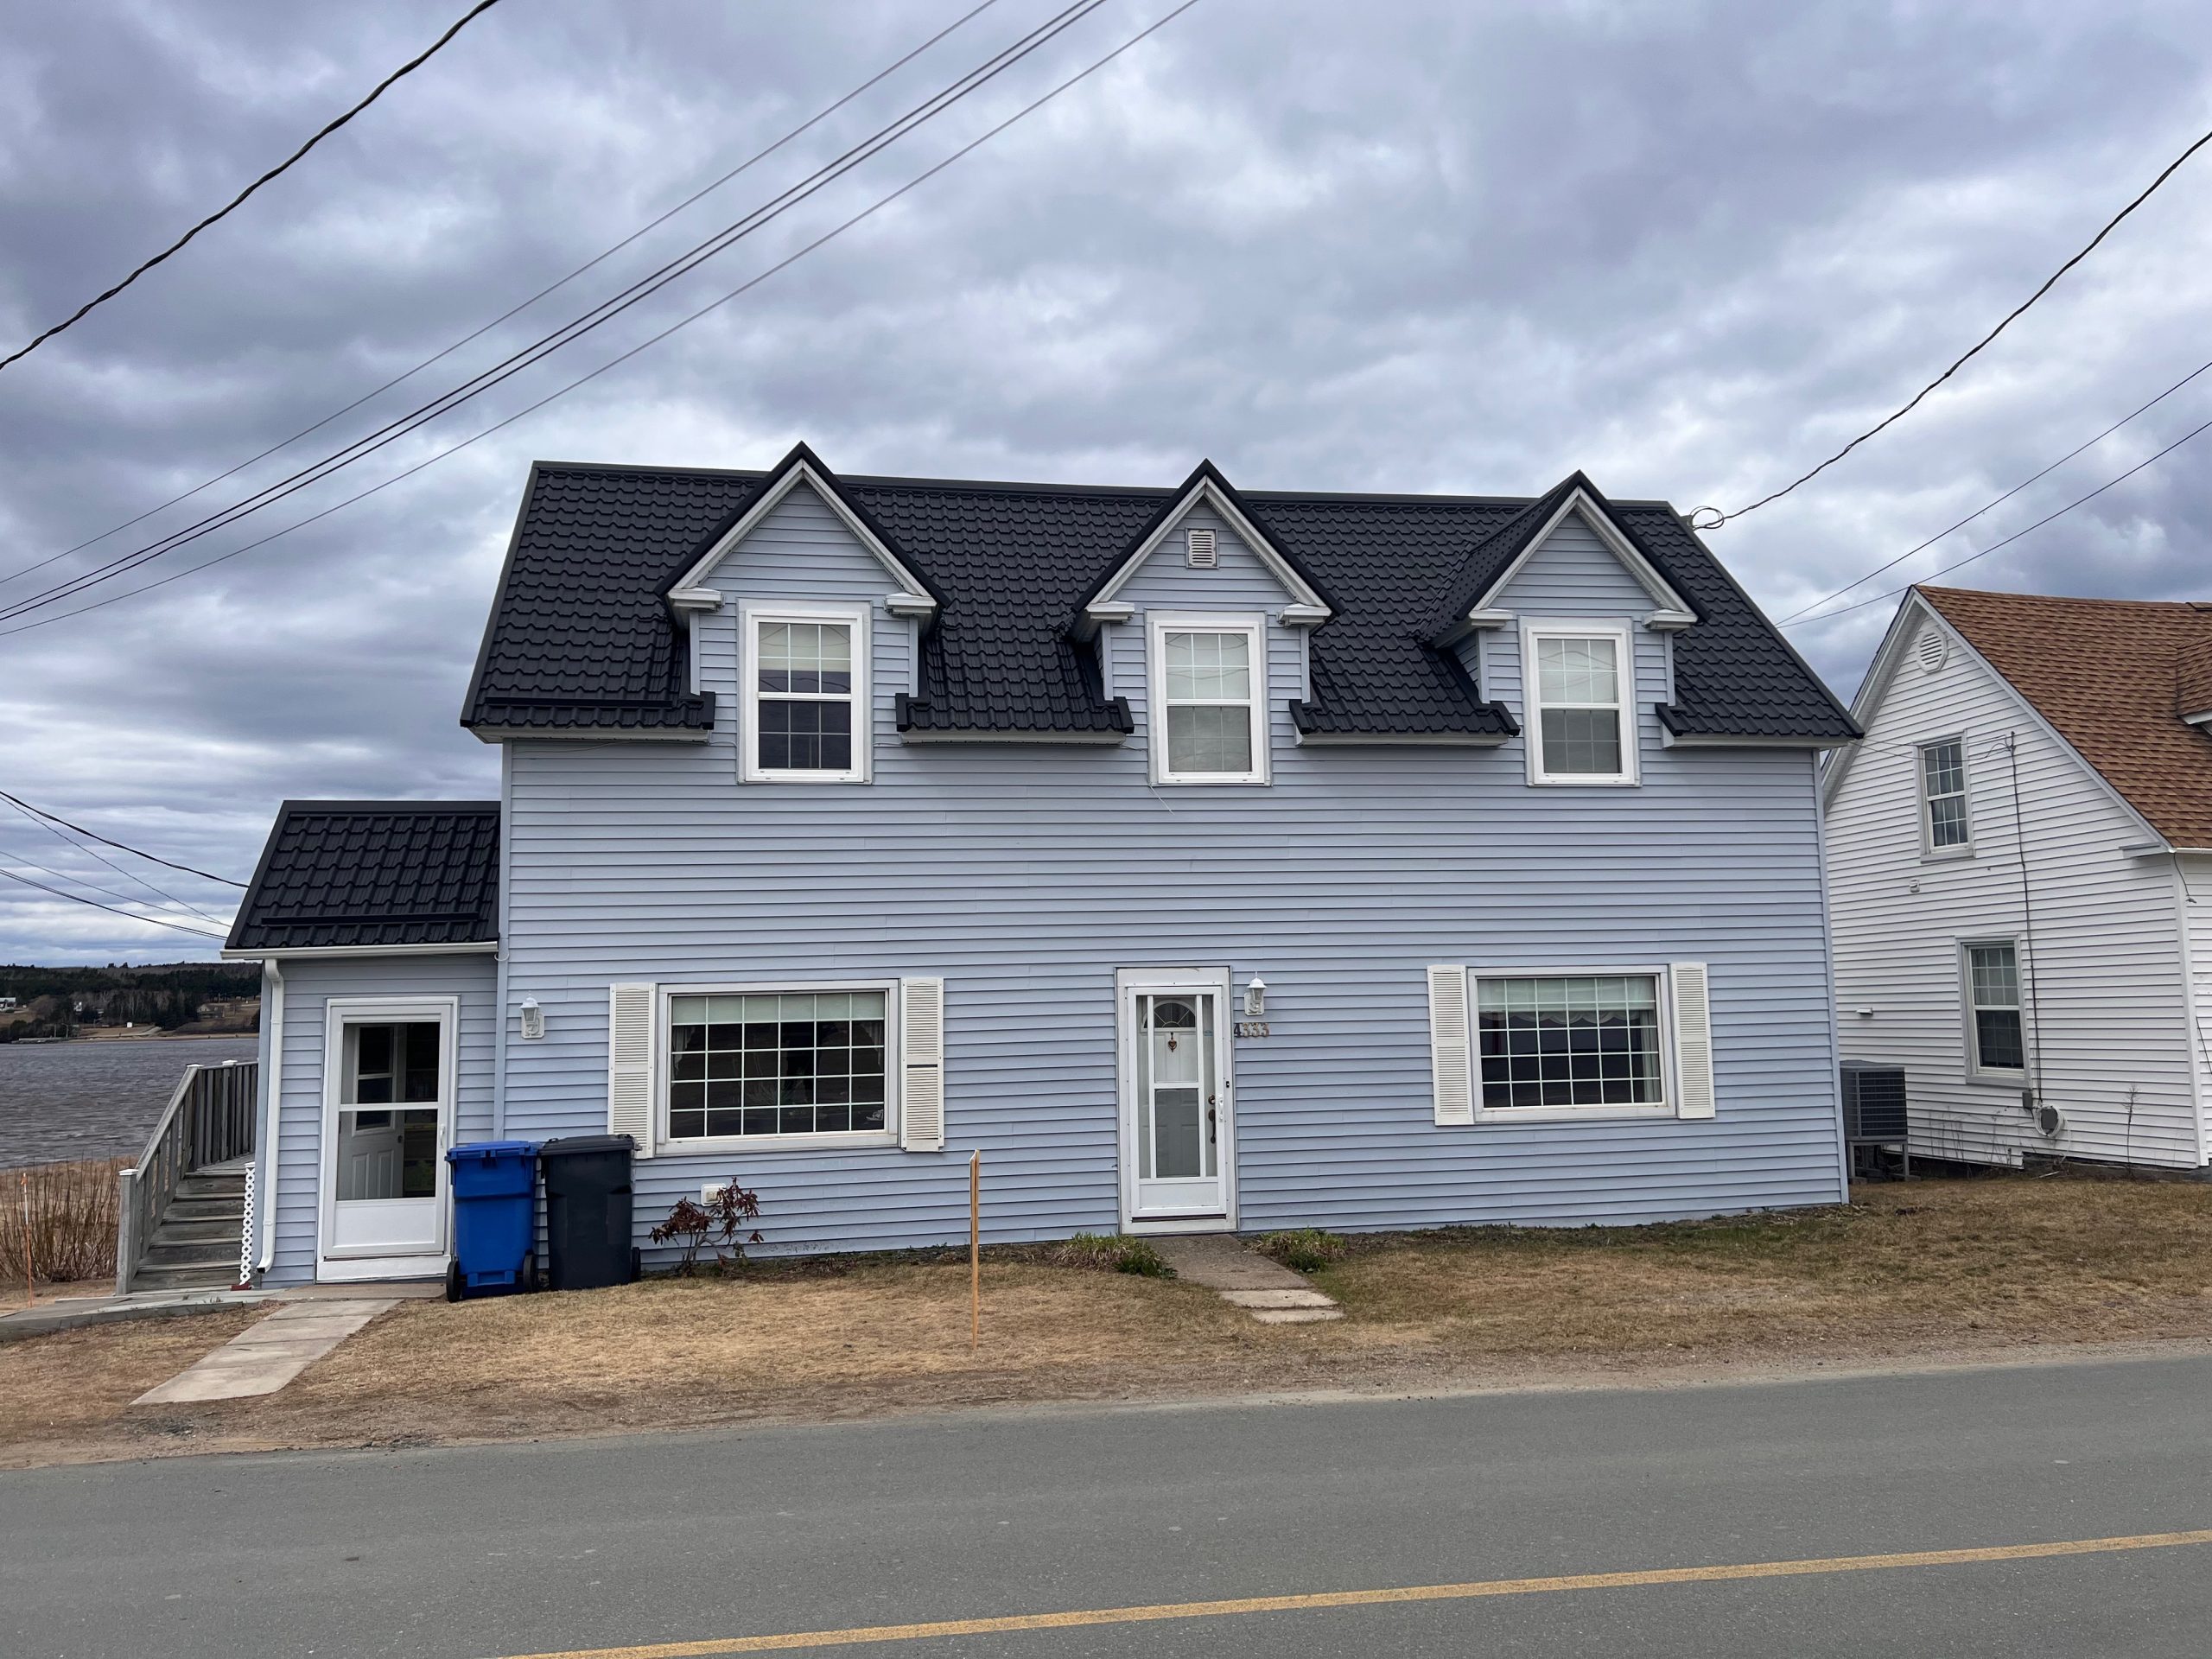 Miramichi G70 Black Roof 1 The only roof you'll ever need